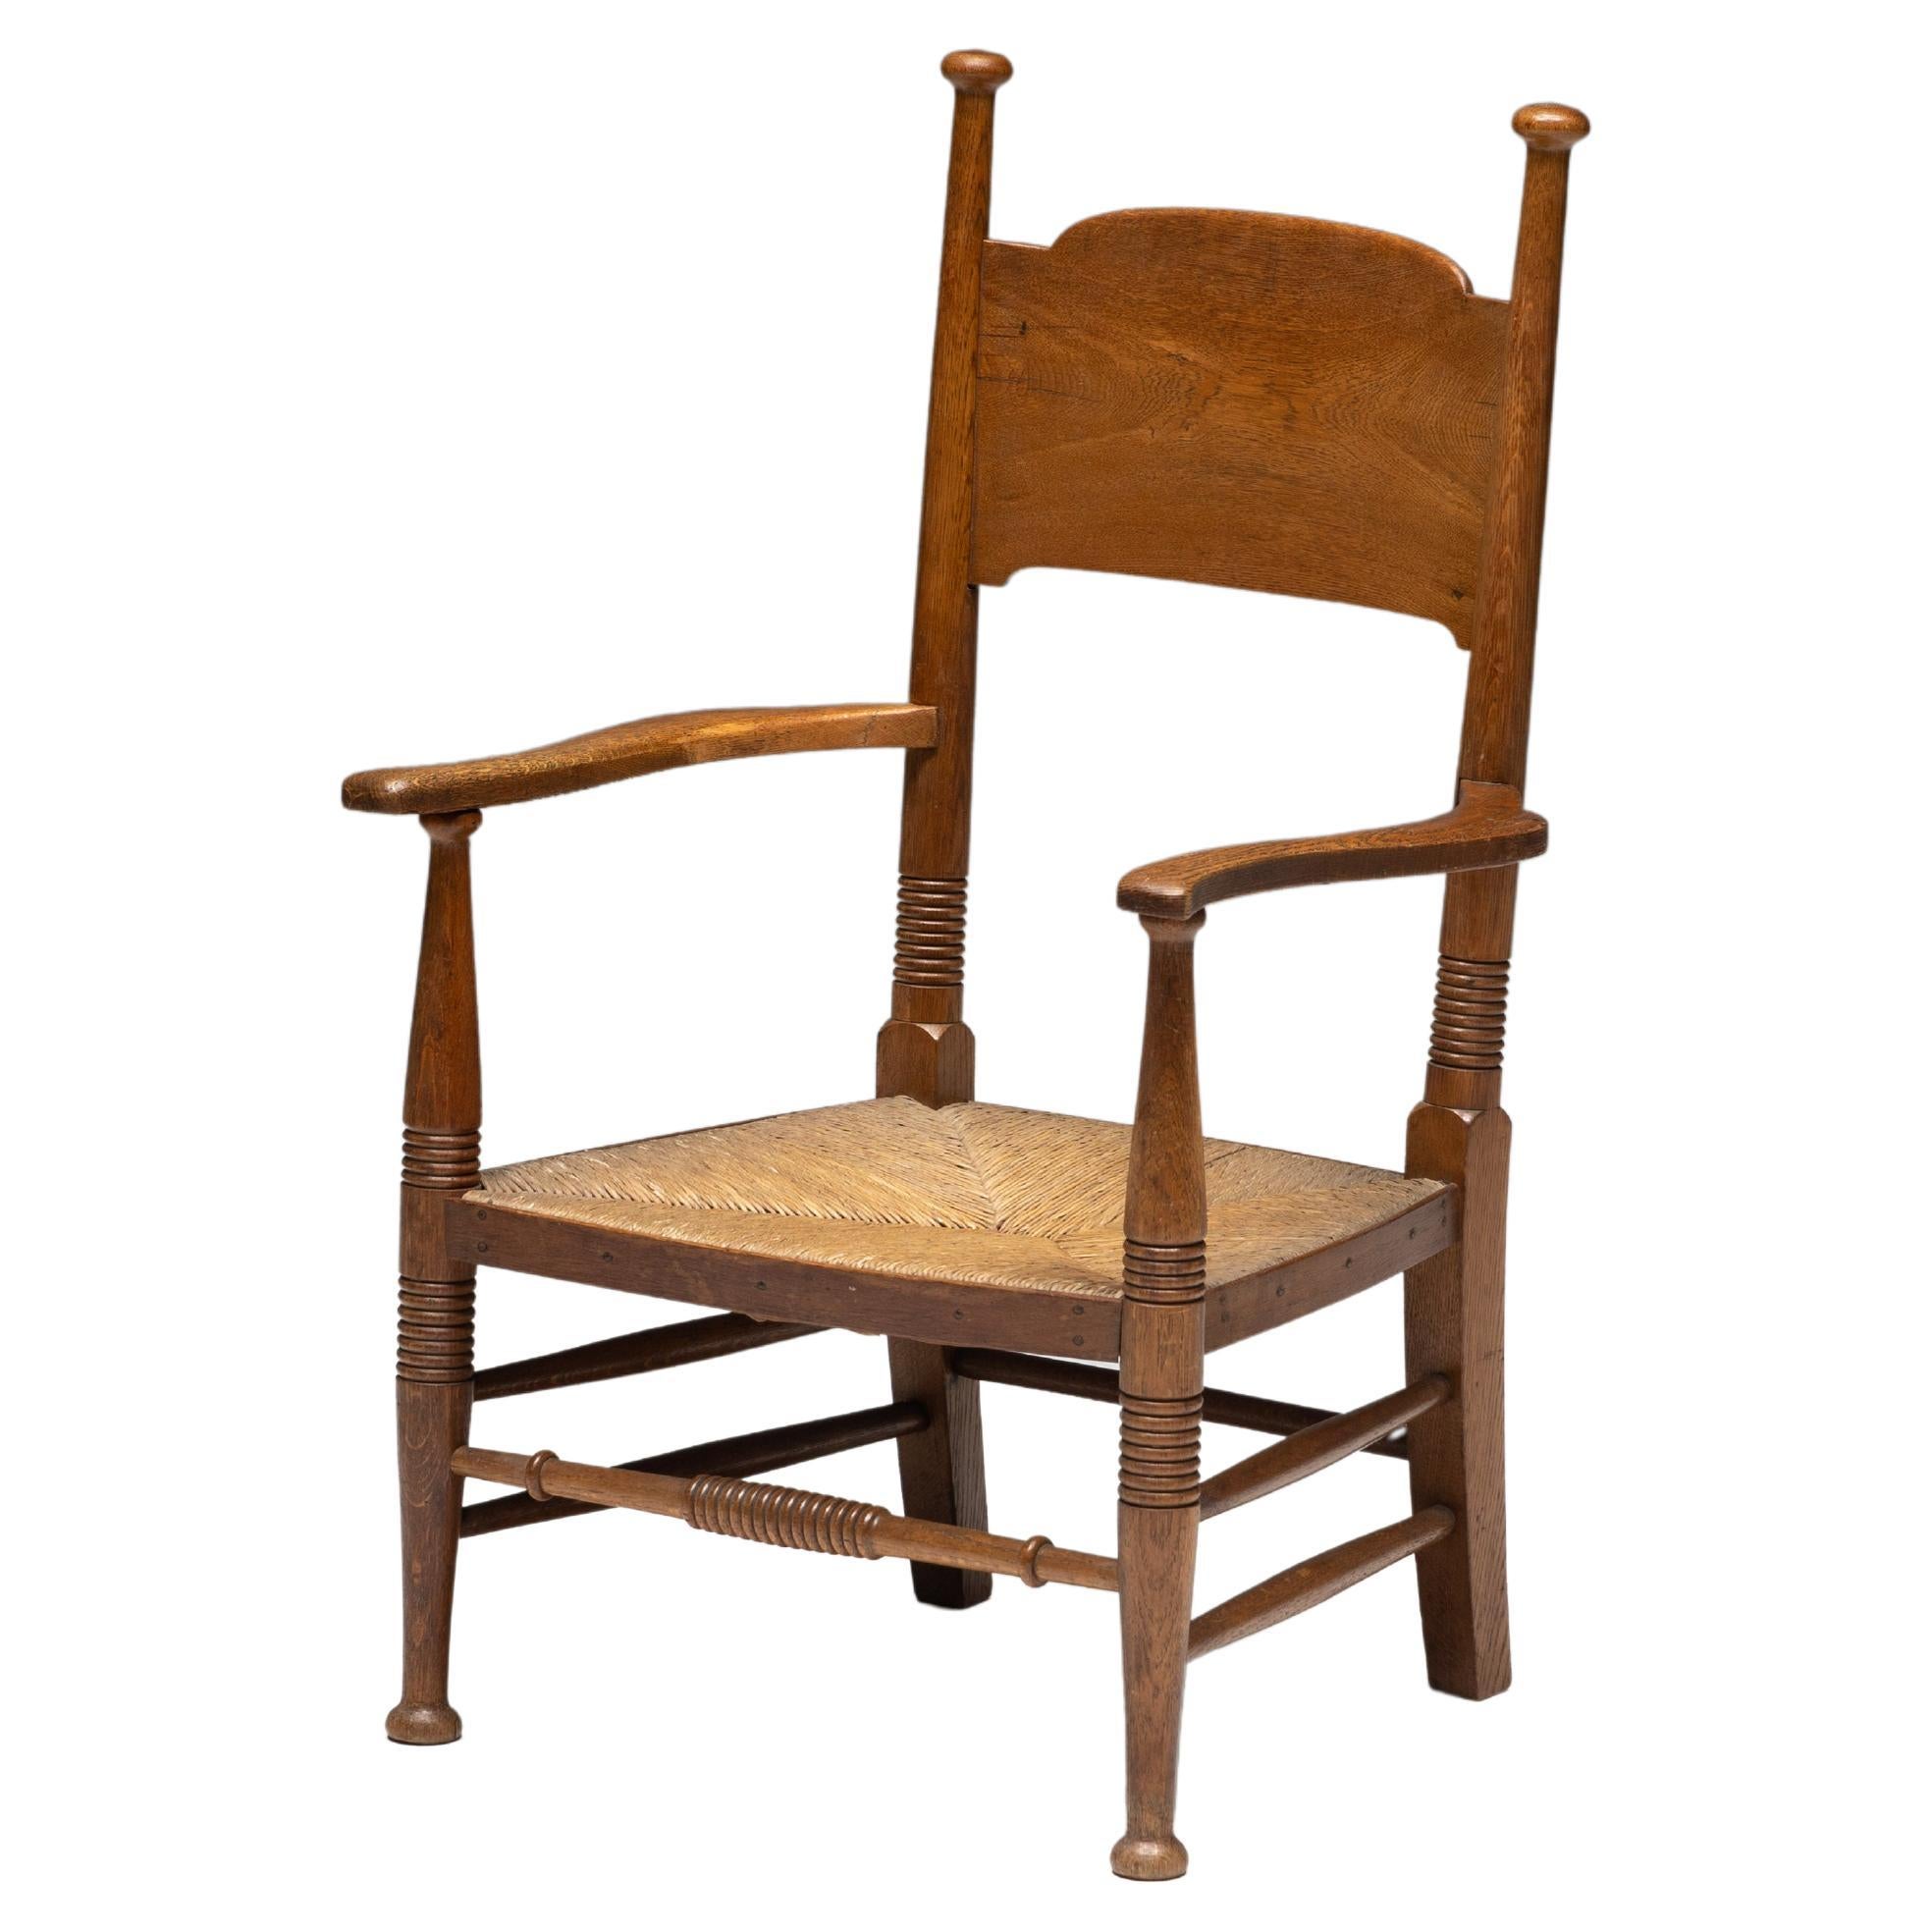 Rustic Armchair in Solid Oak and Straw, United Kingdom, 1900s For Sale